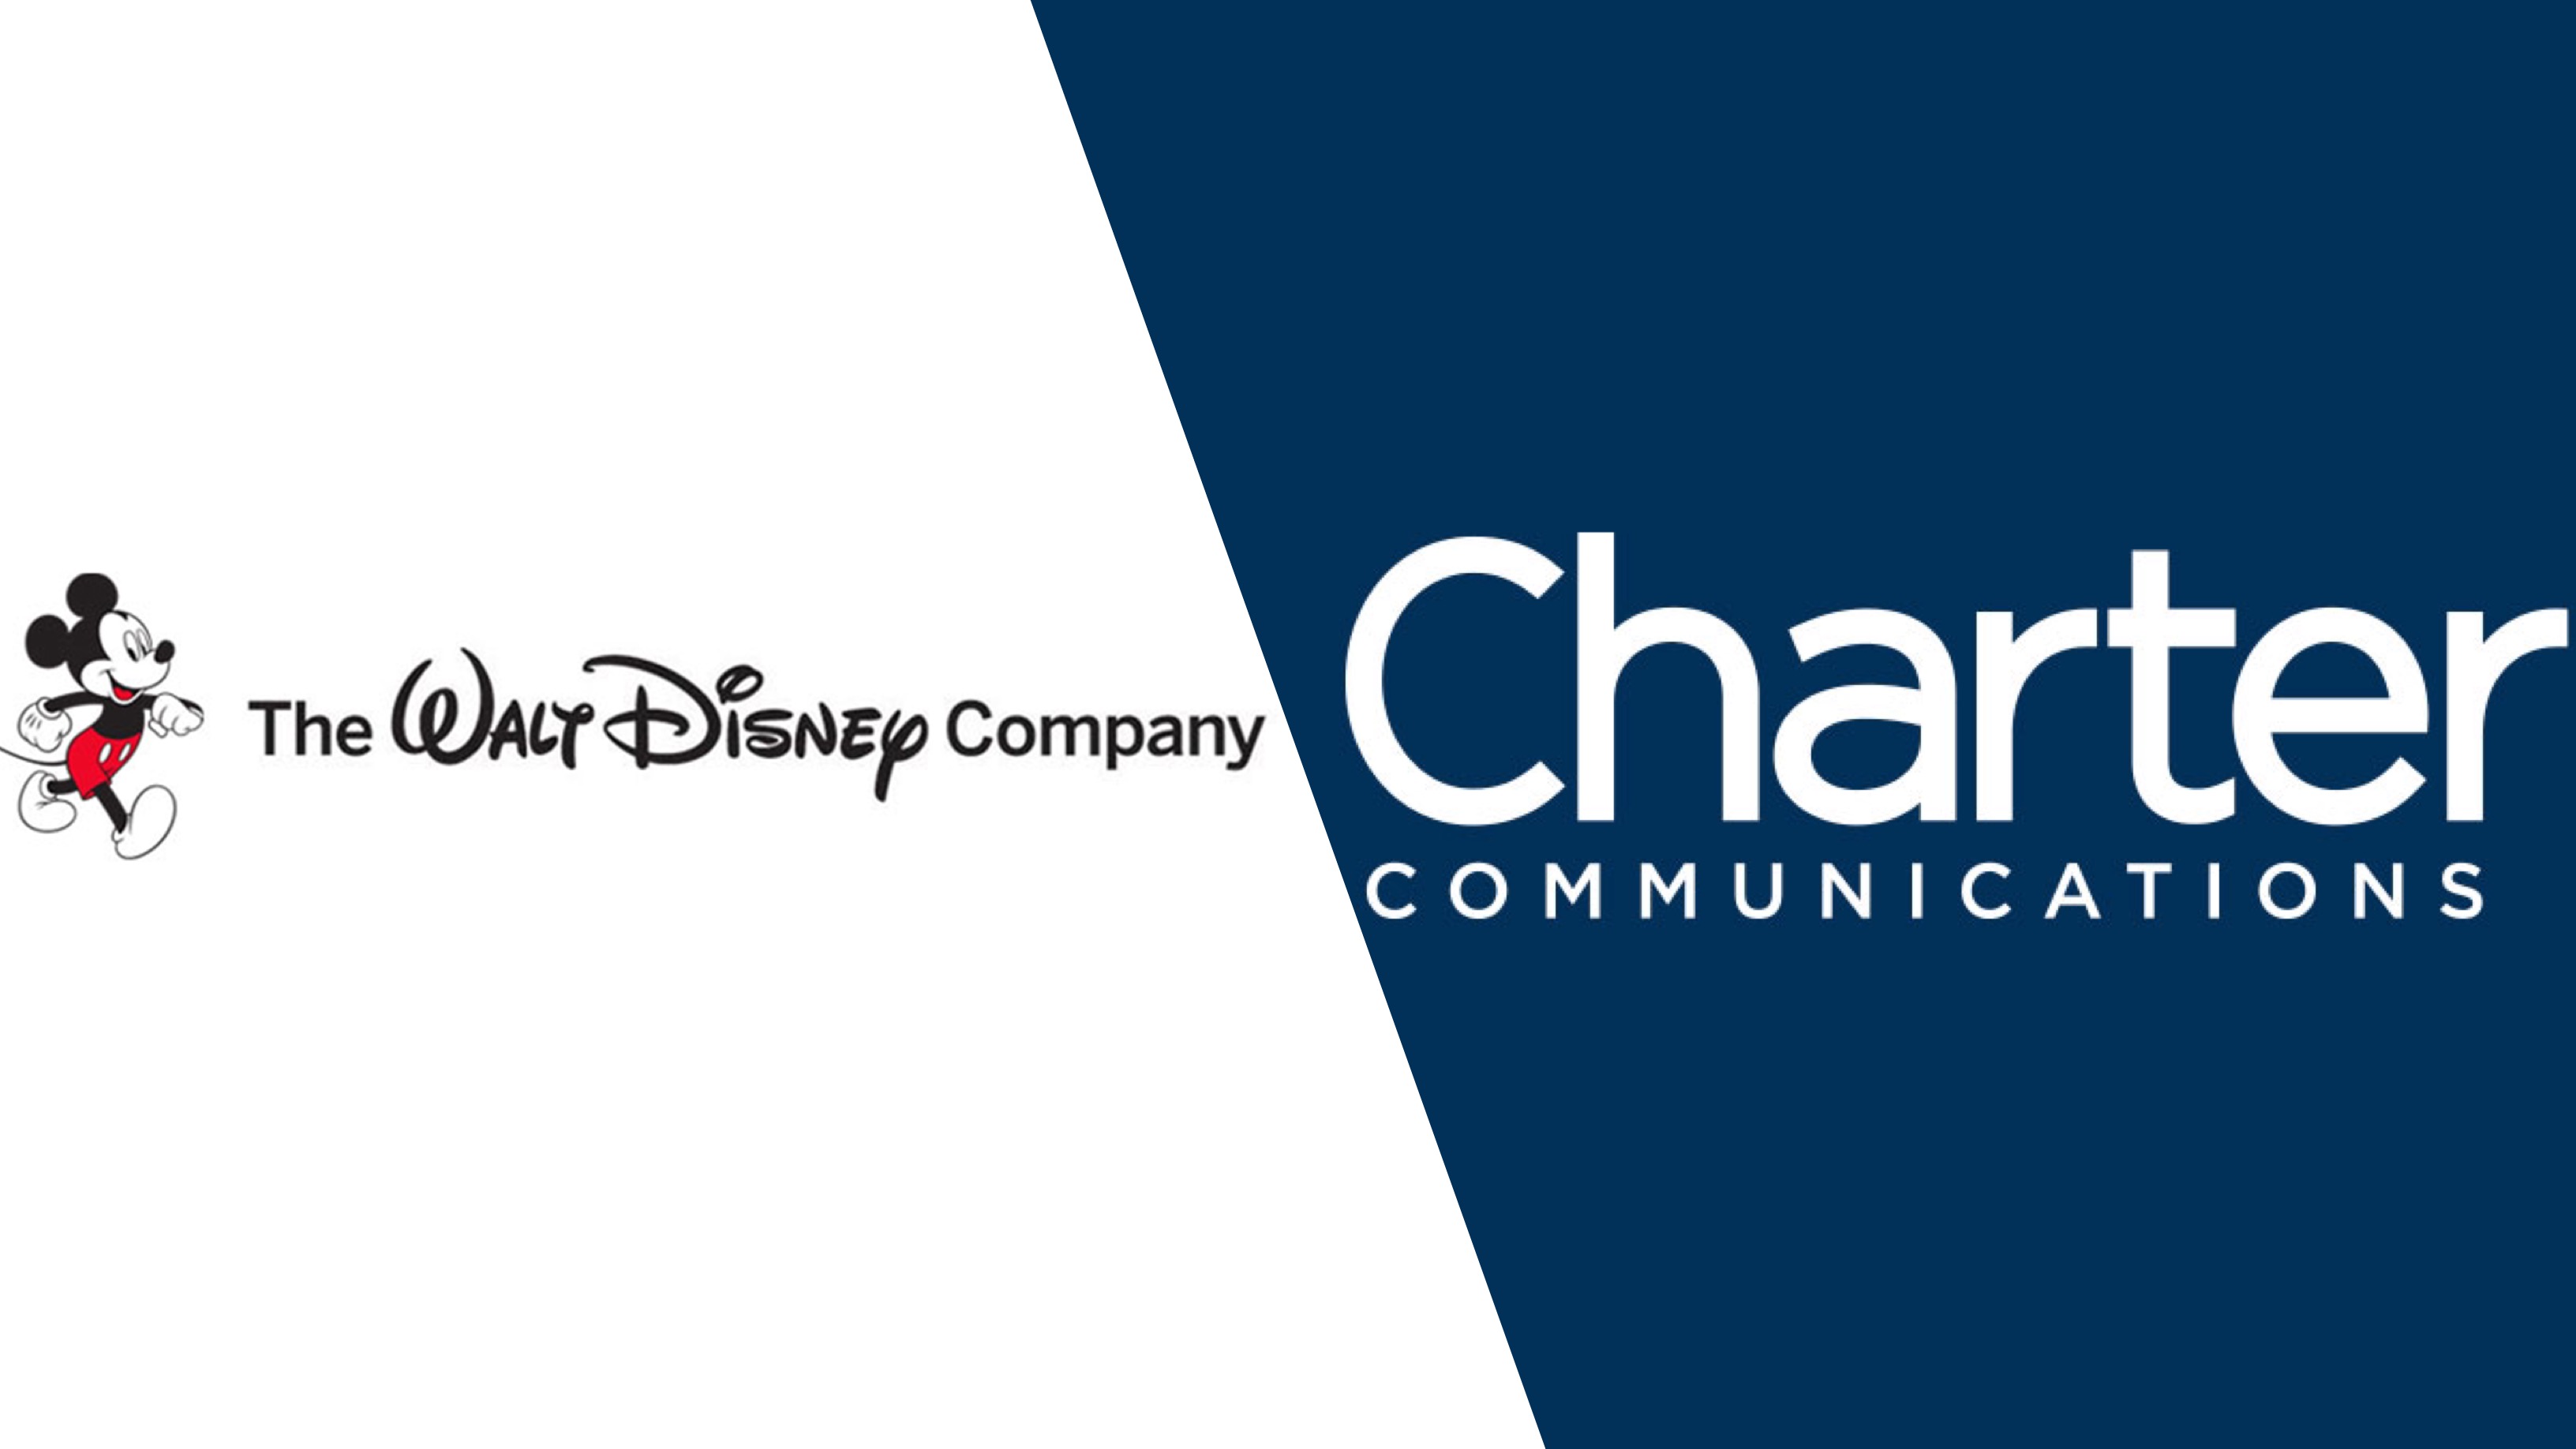 The Walt Disney Company and Charter Communications Announce Agreement